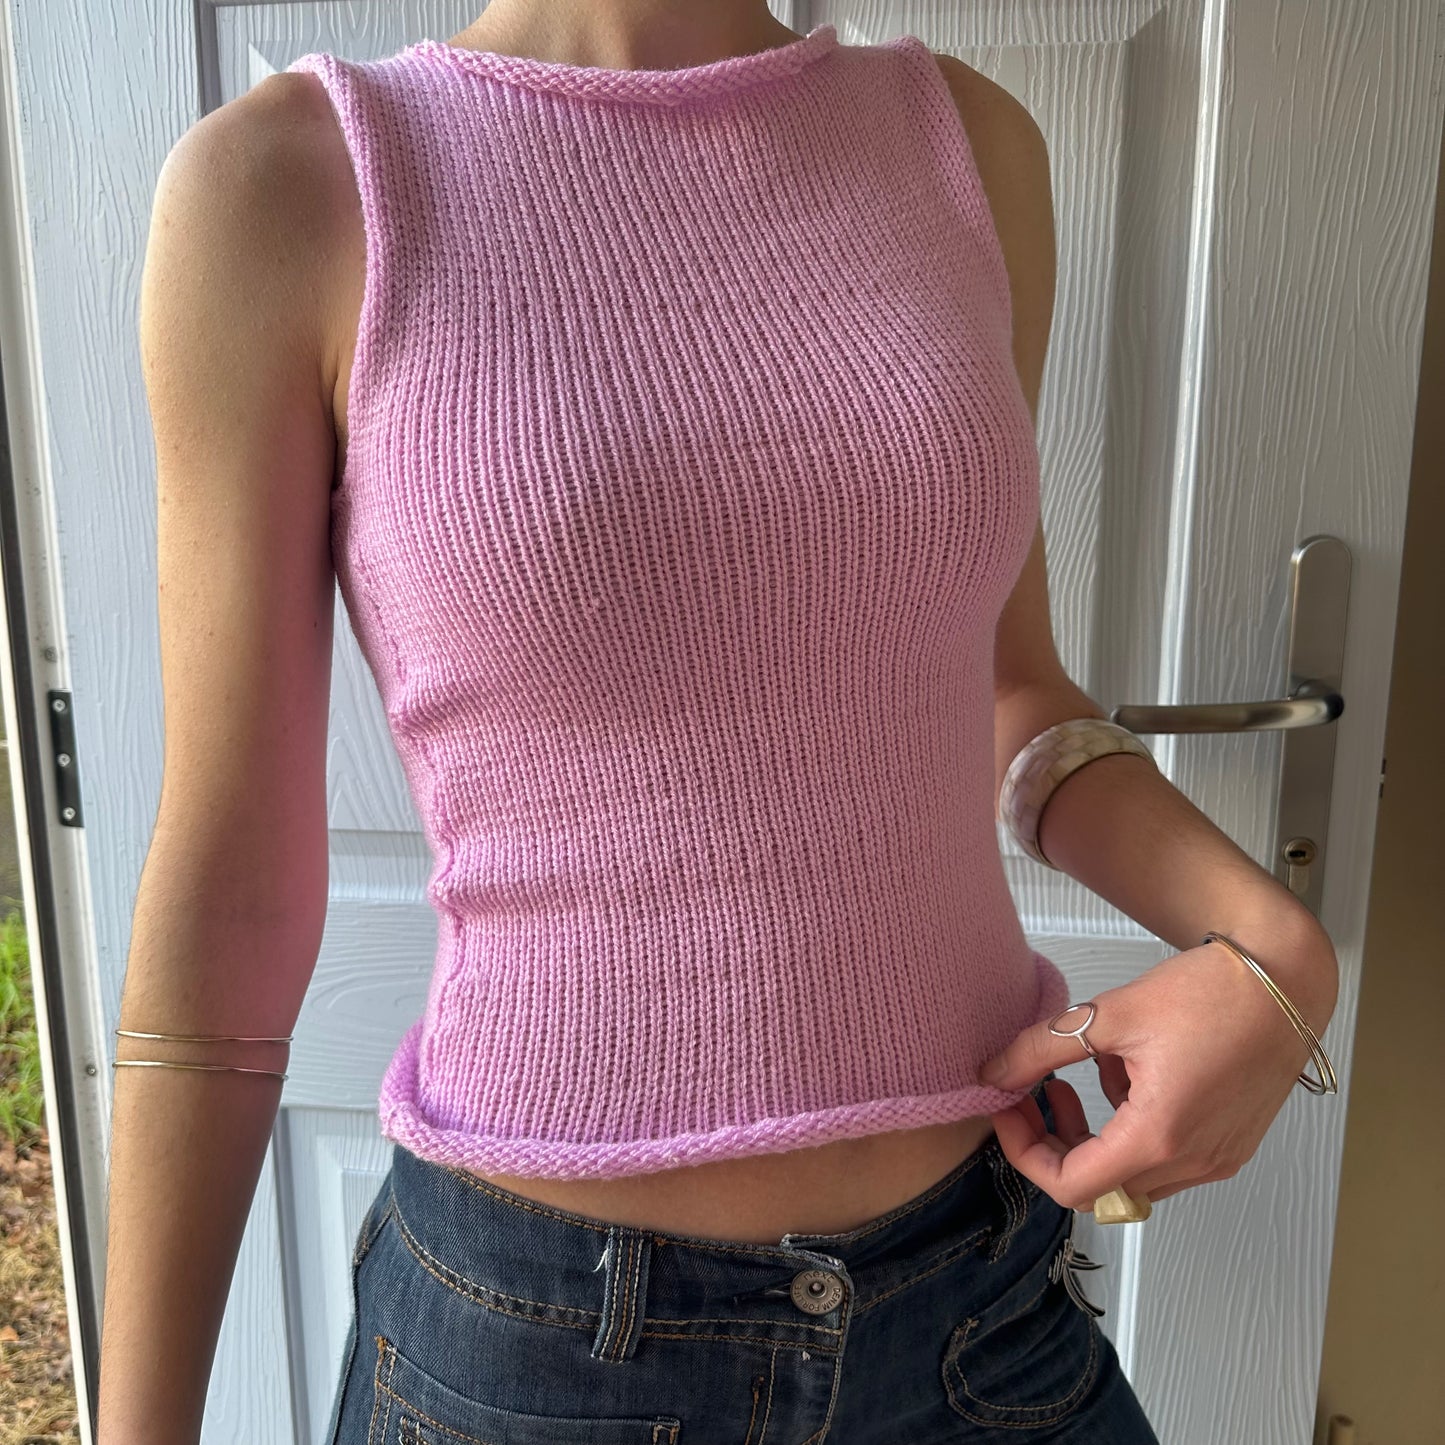 Handmade baby pink knitted vest top